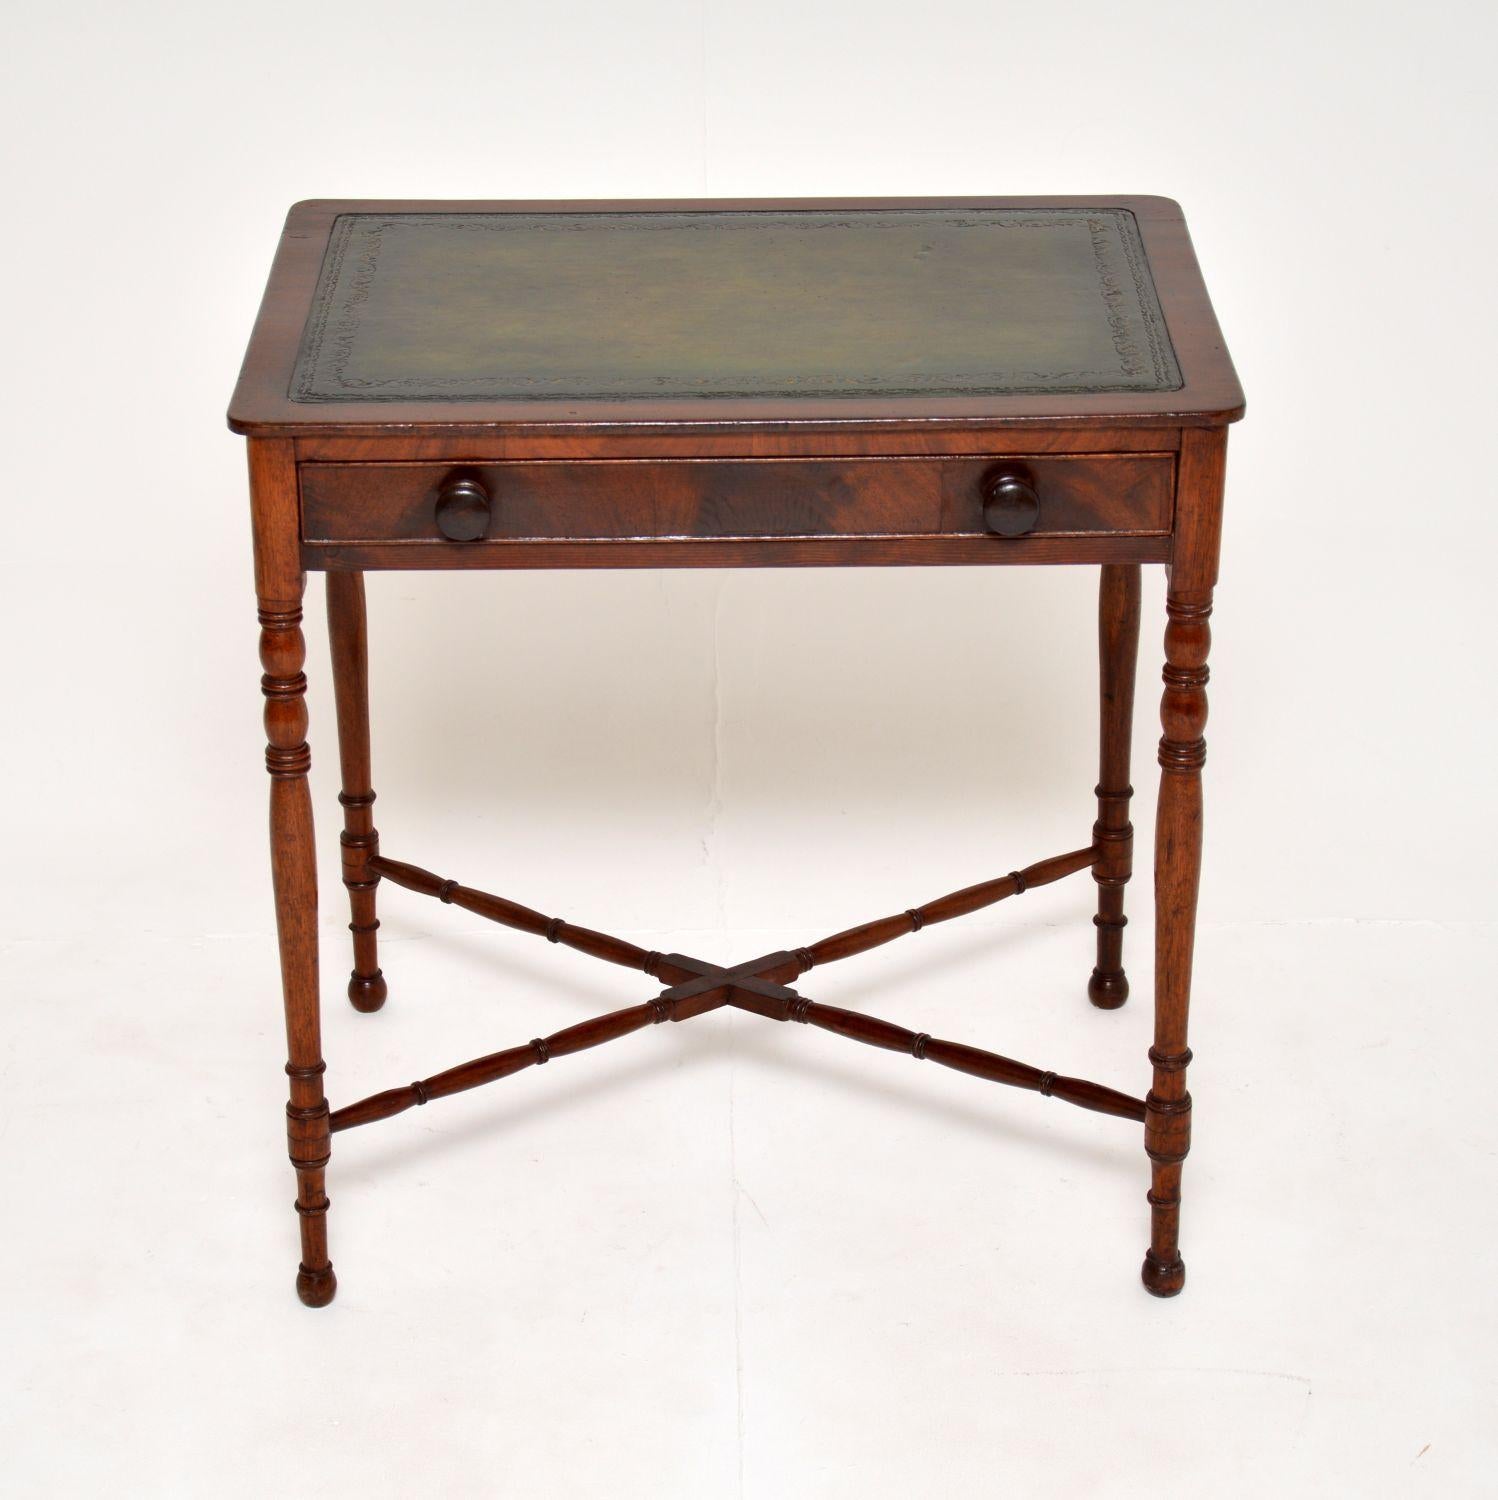 A charming antique Victorian writing table. This was made in England, it dates from around the 1860-1880 period.

It is a lovely size, fairly small and compact with a good sized working surface. The inset leather top is hand coloured and gold